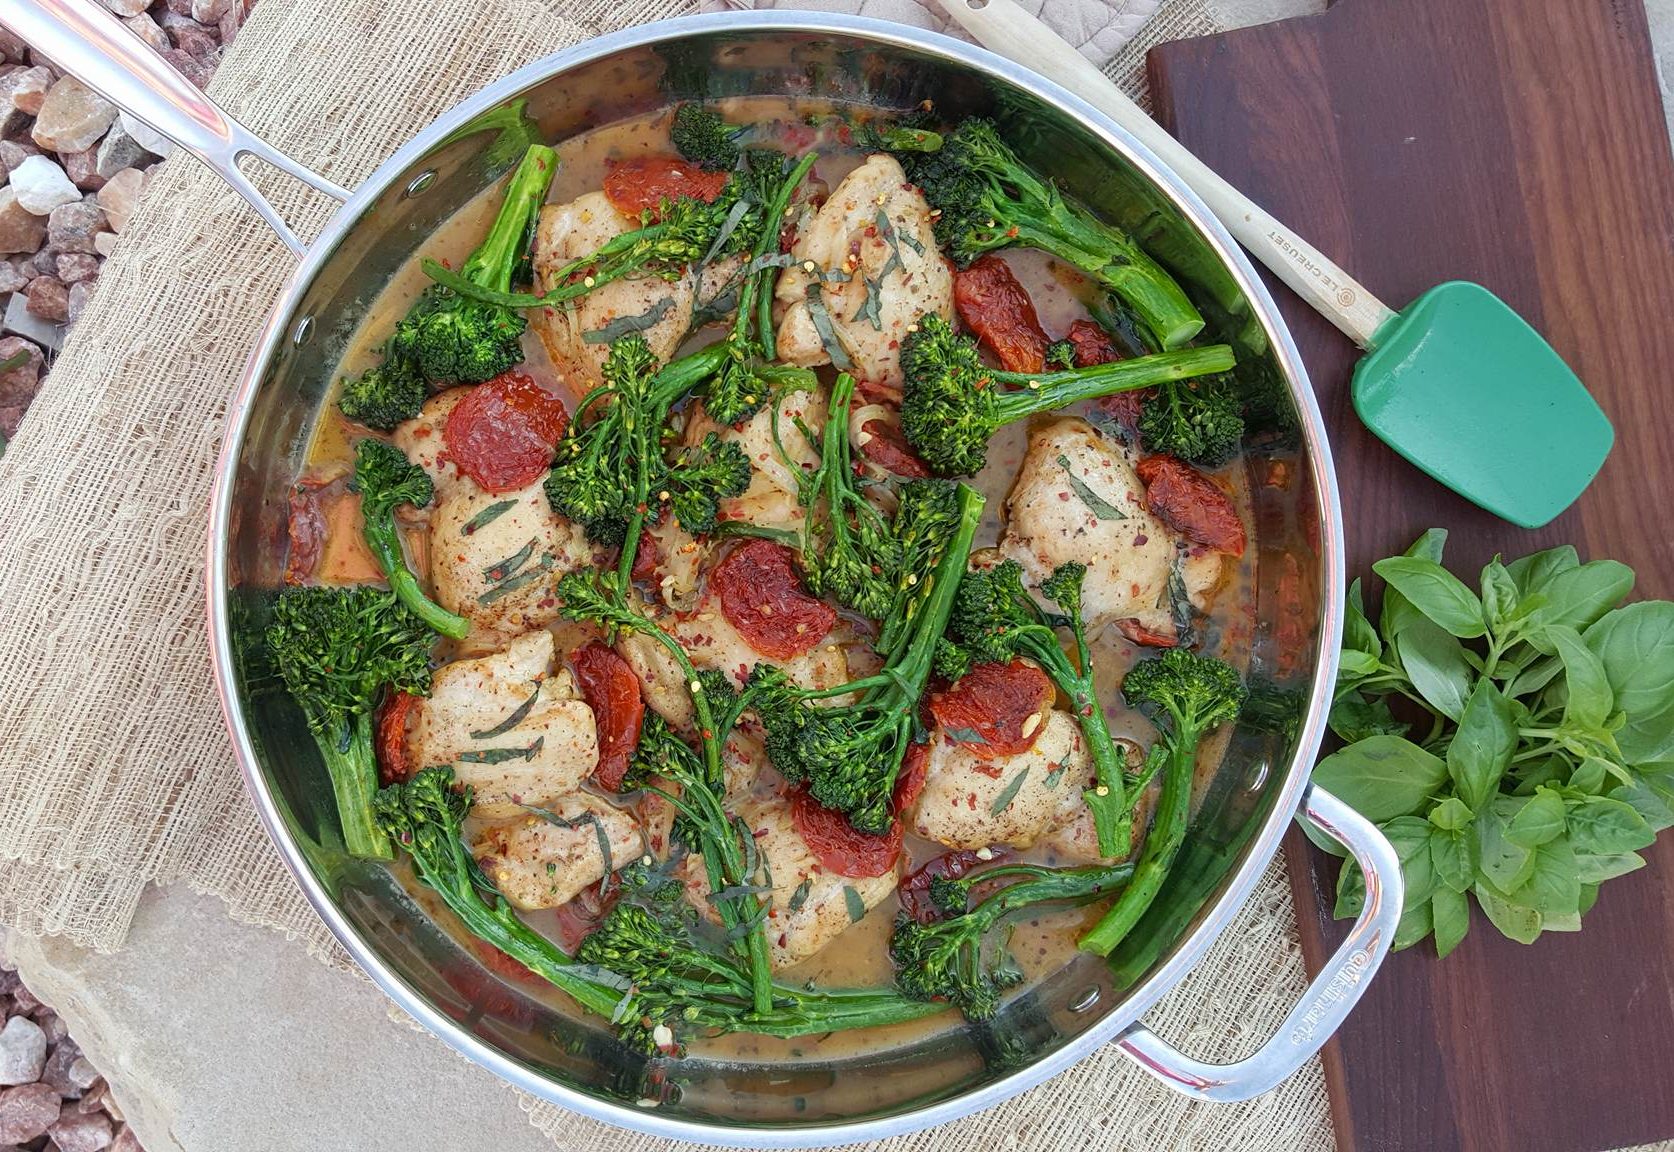 Sundried Tomato Chicken thighs with Broccolini Clean Eating Recipes https://cleanfoodcrush.com/sundried-tomato-chicken/